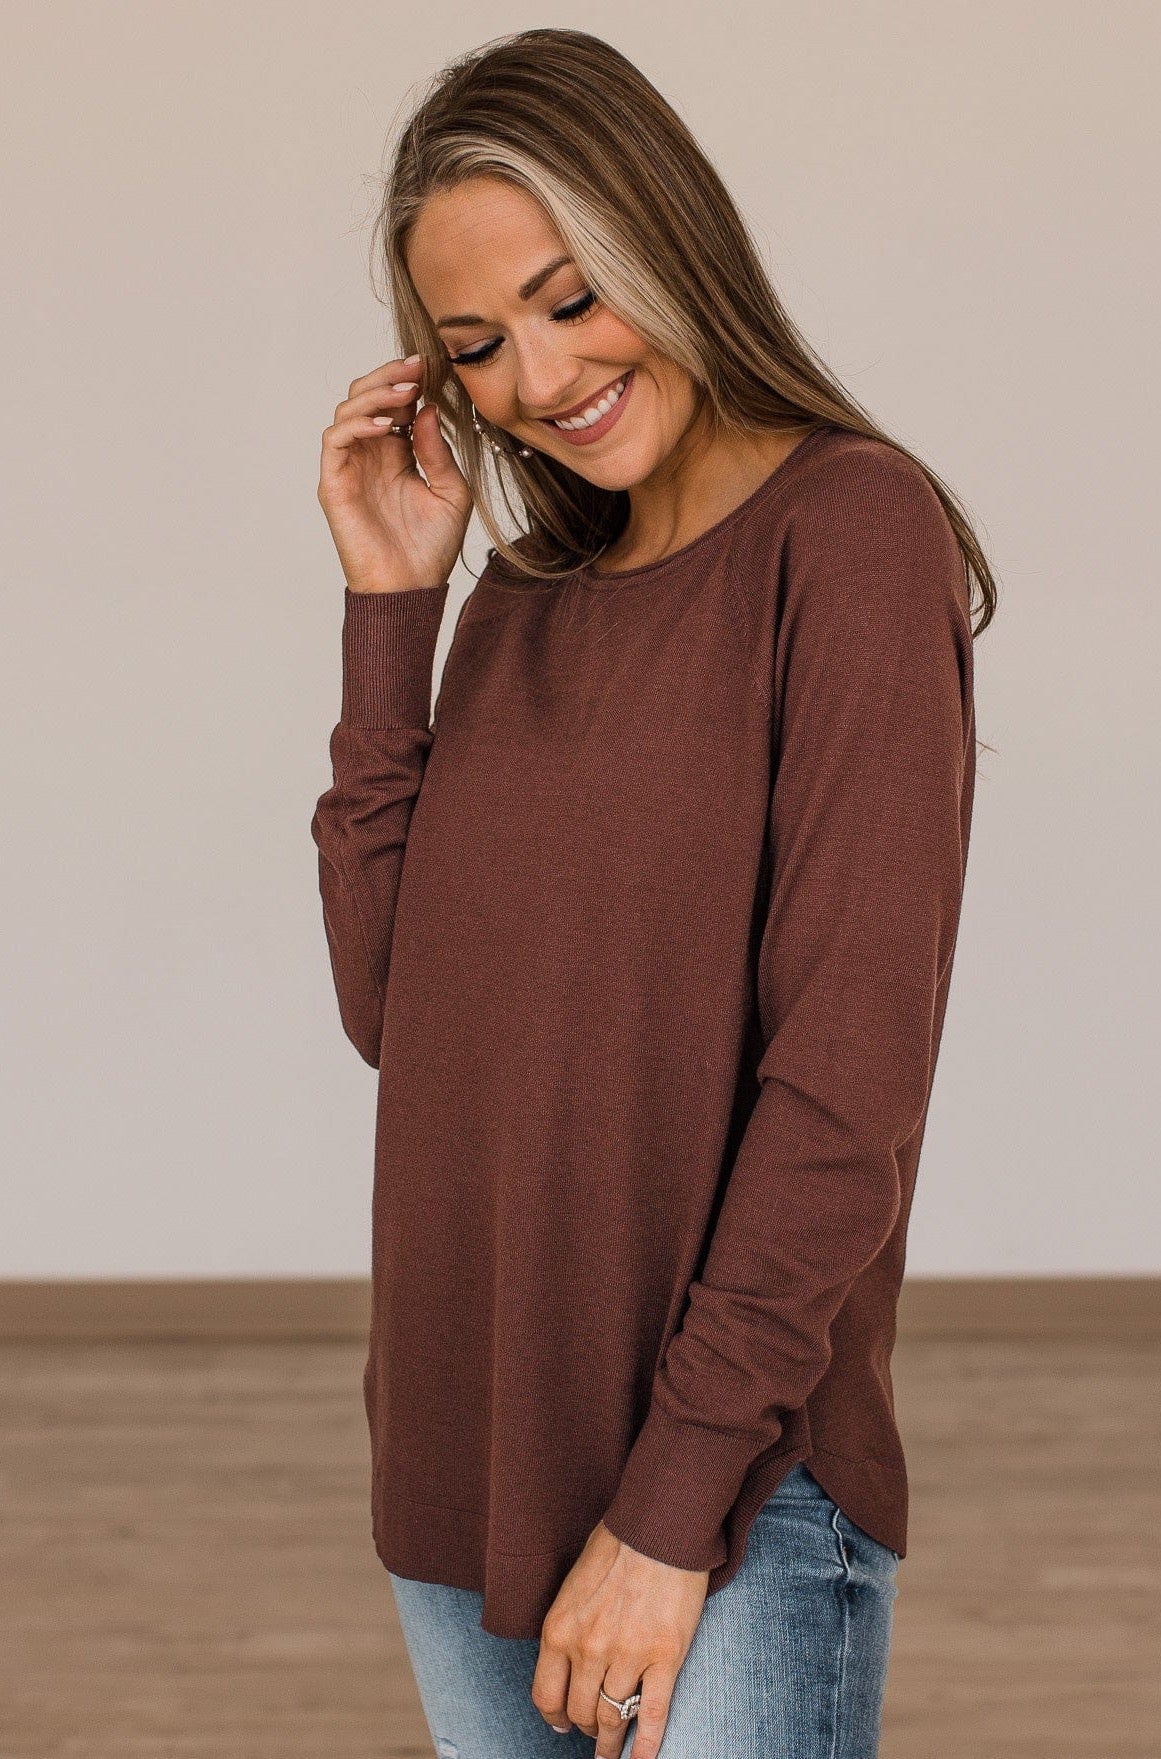 Butter Me Up Knit Sweater- Chocolate